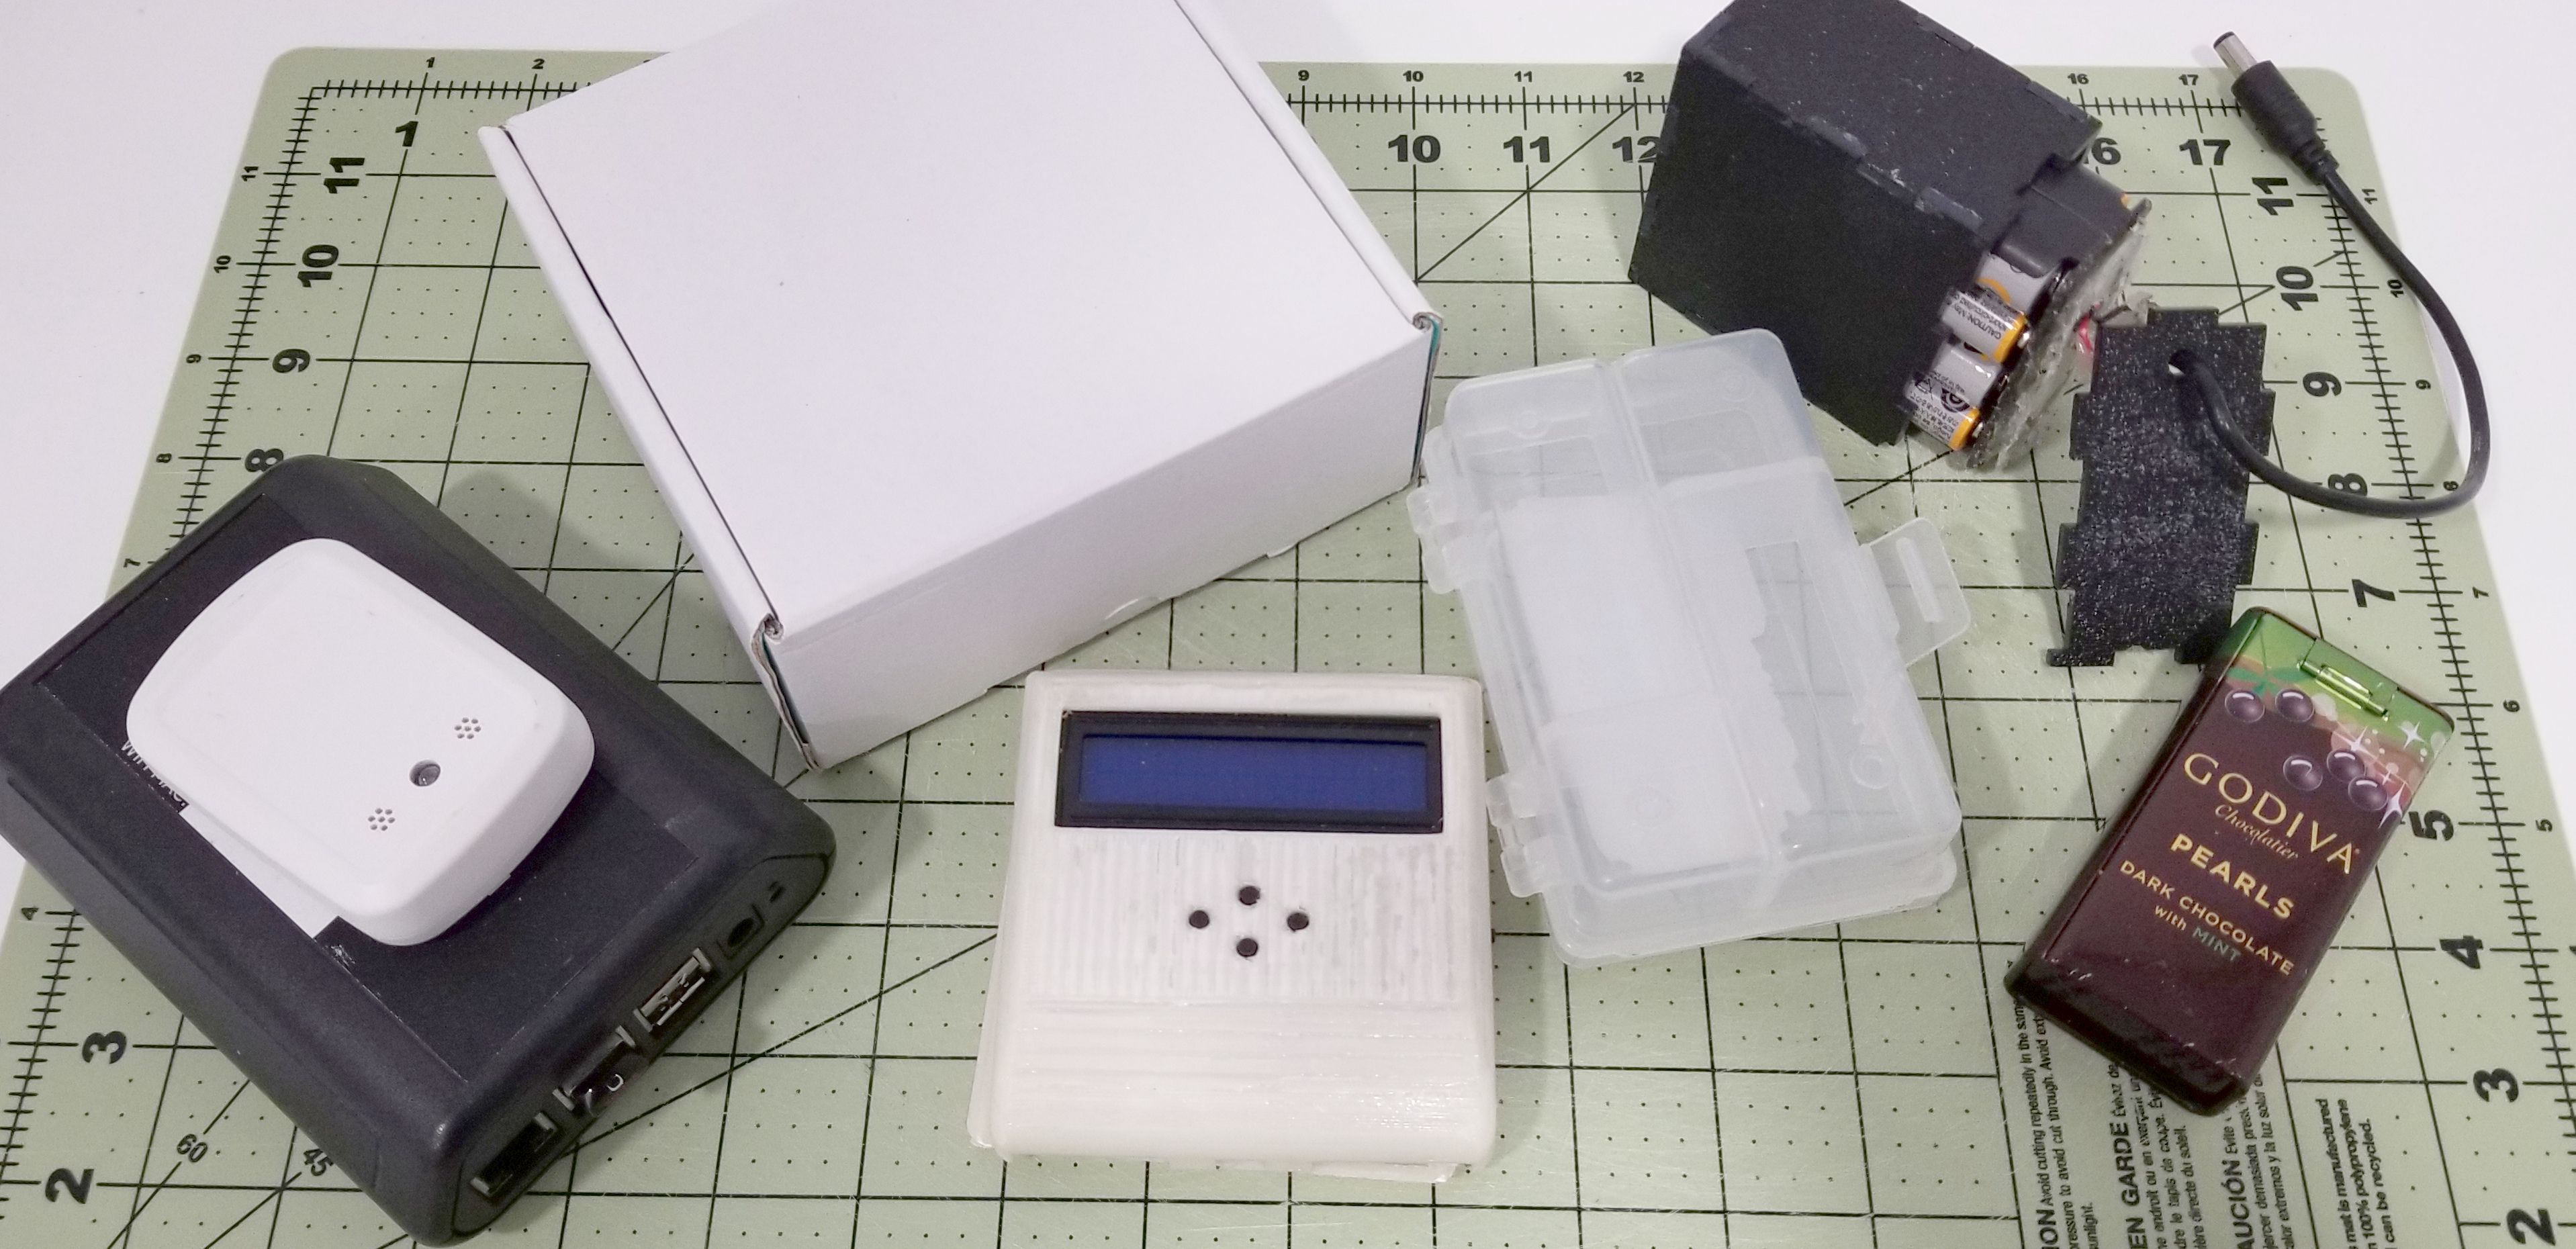 3 NEW SIZES ADDED on SMALL IoT PLASTIC CASE / WALLMOUNT SMALL IoT CASE!   TAKACHI - Manufacturer of electronics enclosures and industrial enclosures